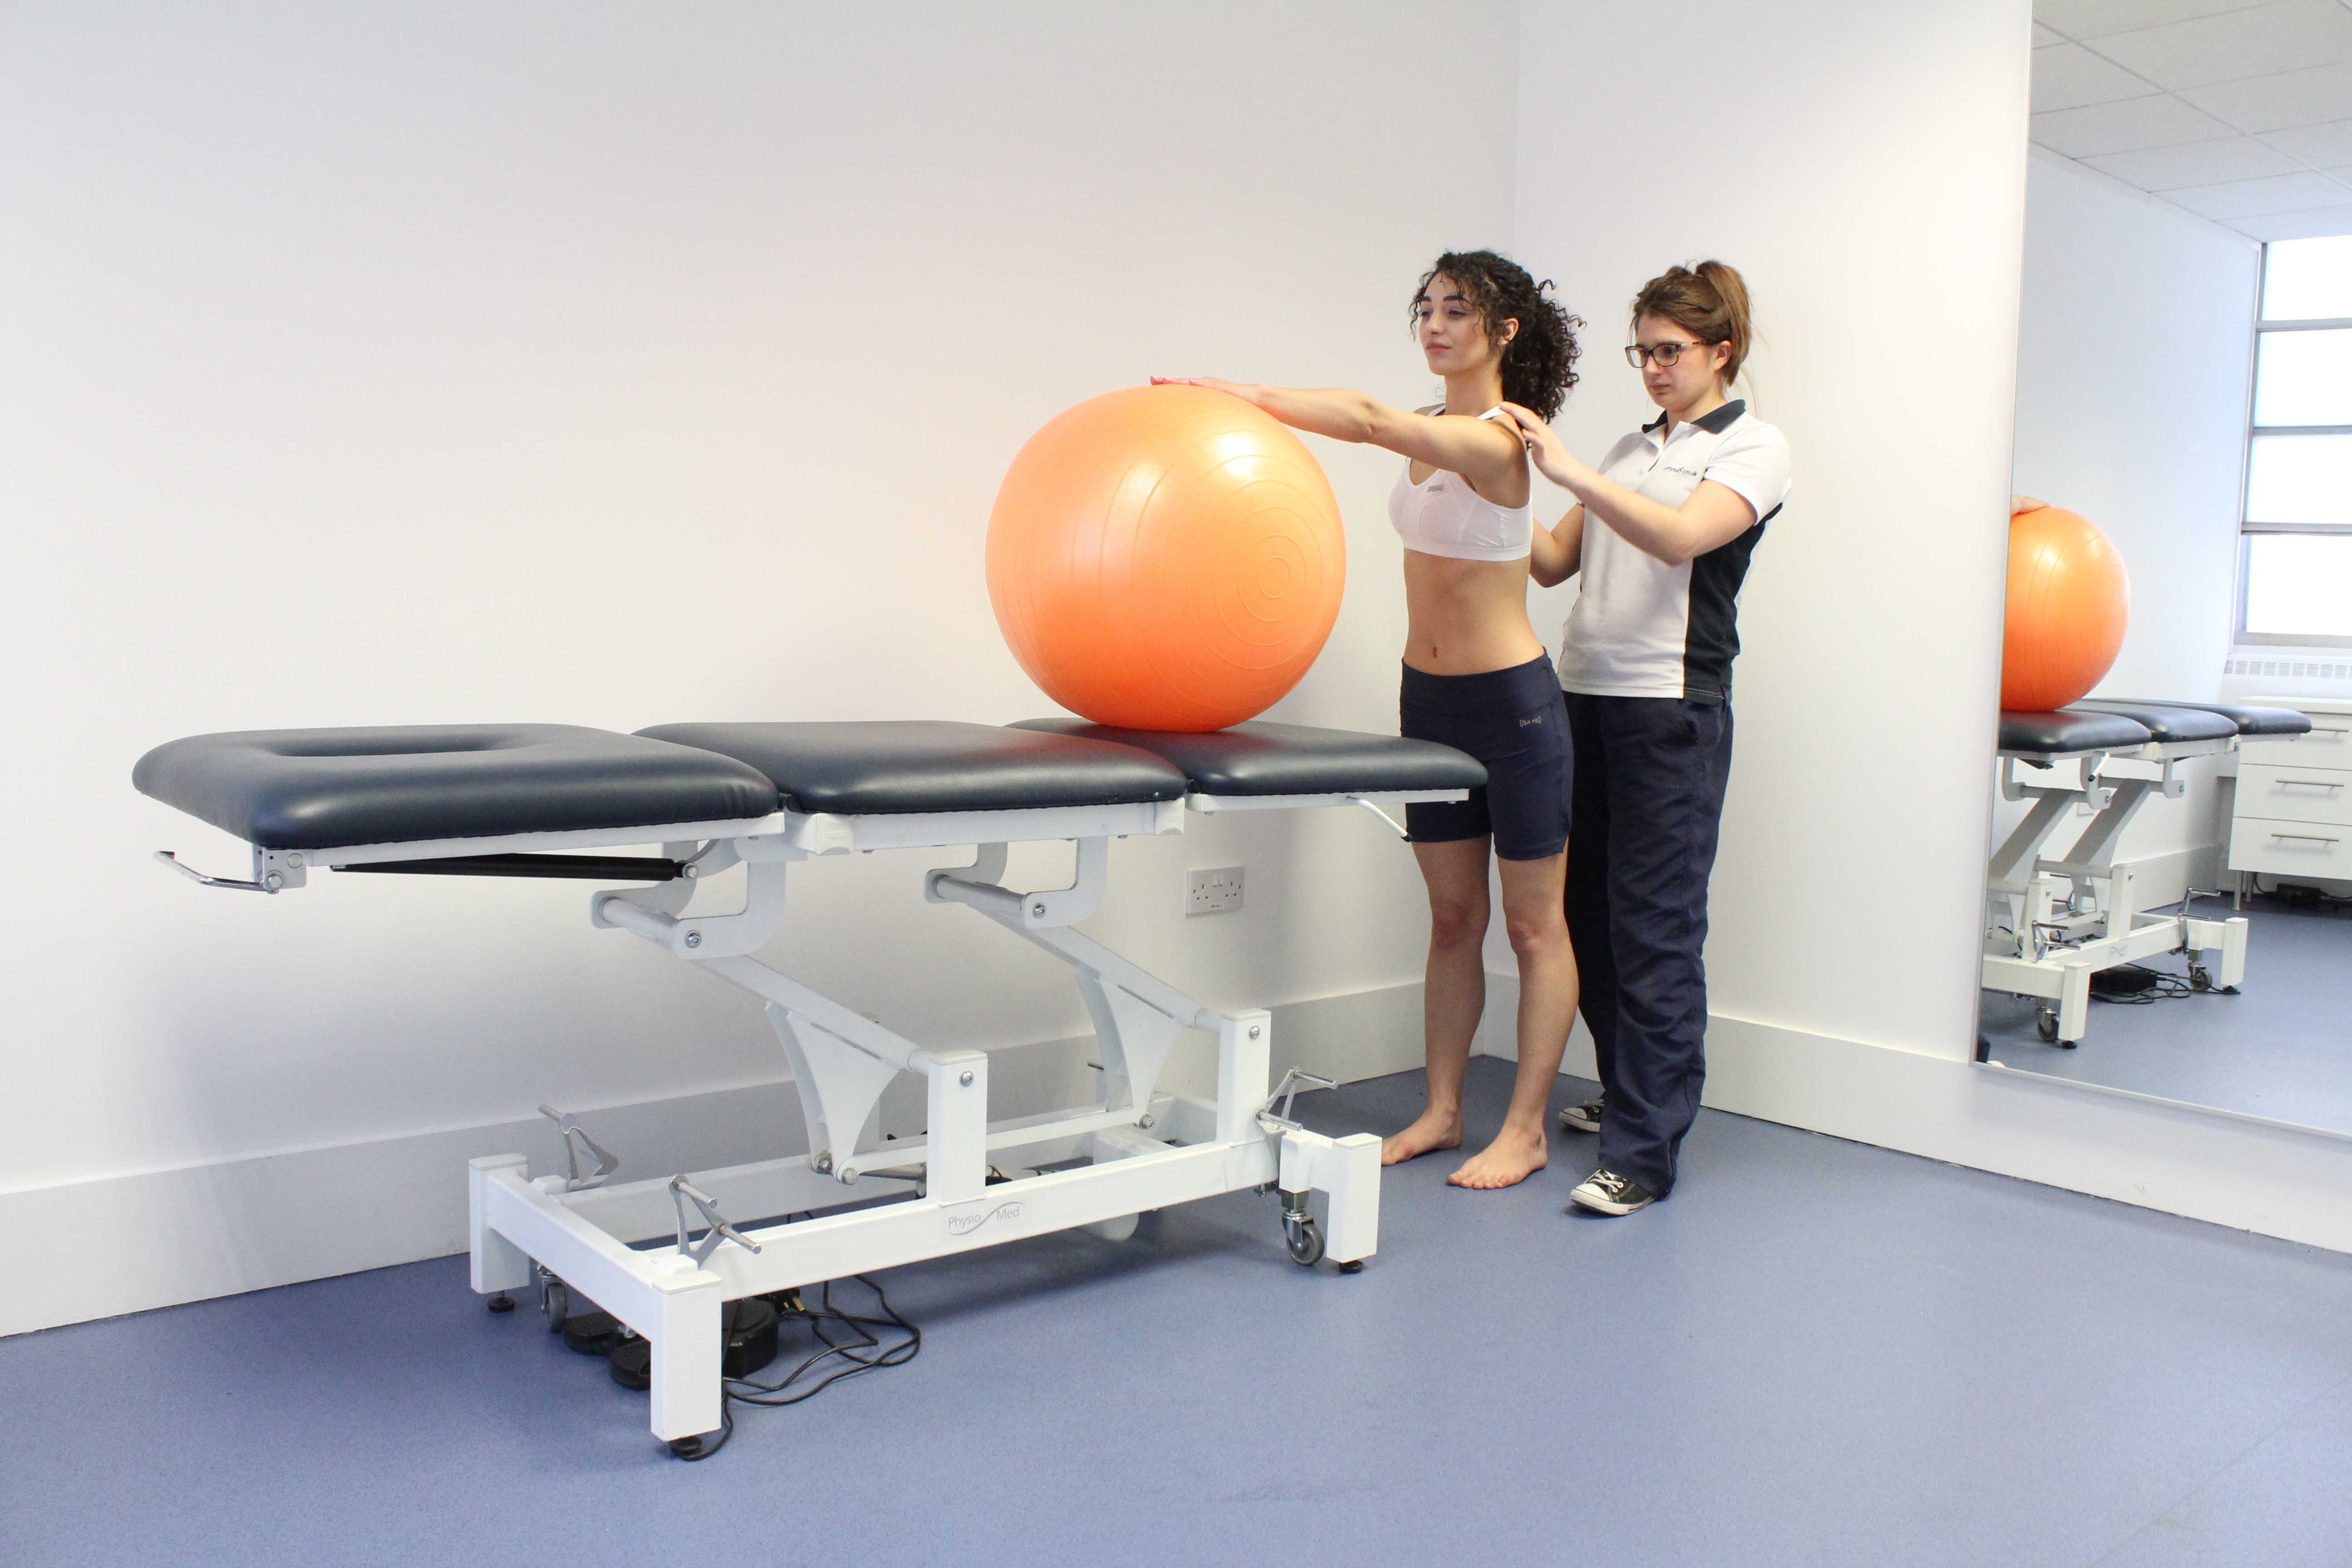 Gym ball assisted shoulder stretches under supervision of physiotherapist